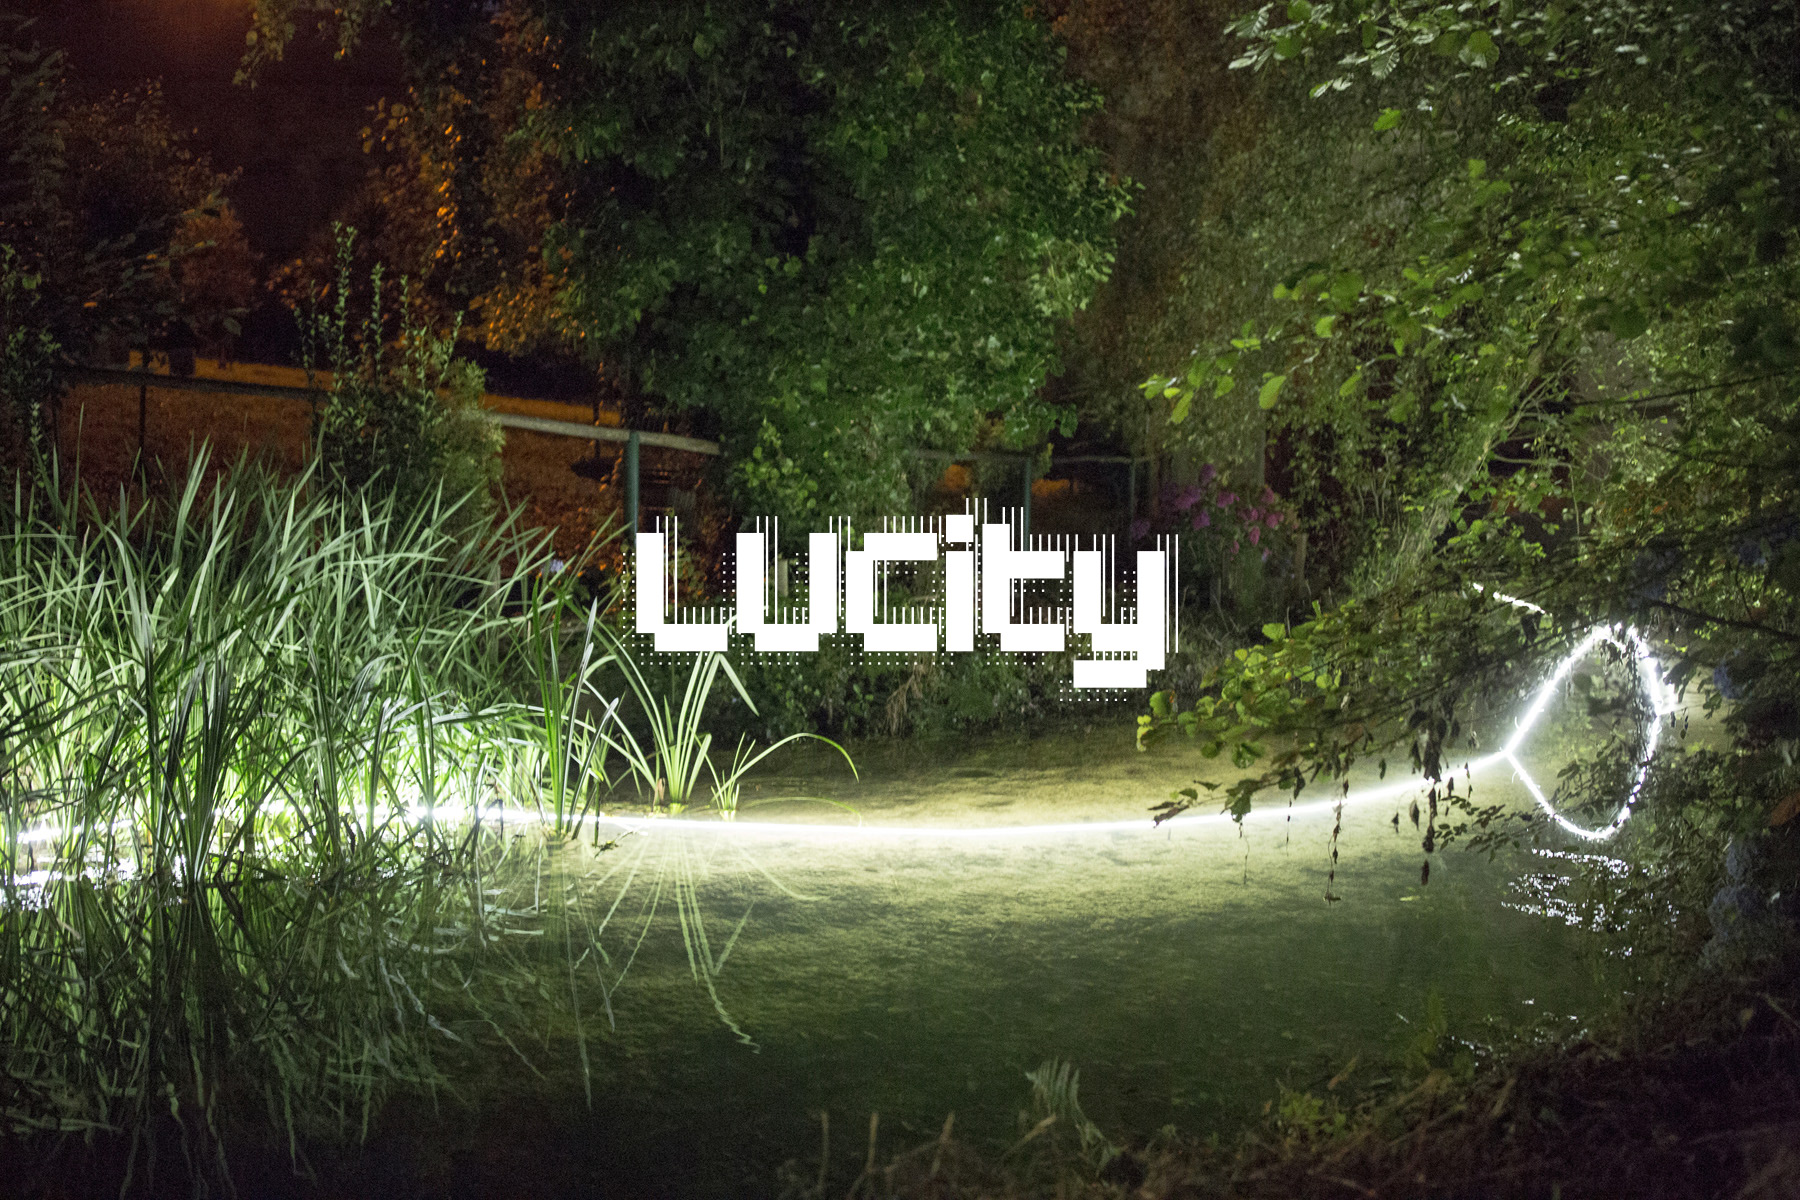 LUCity 2: an exercise in Light, Geometry and Colour